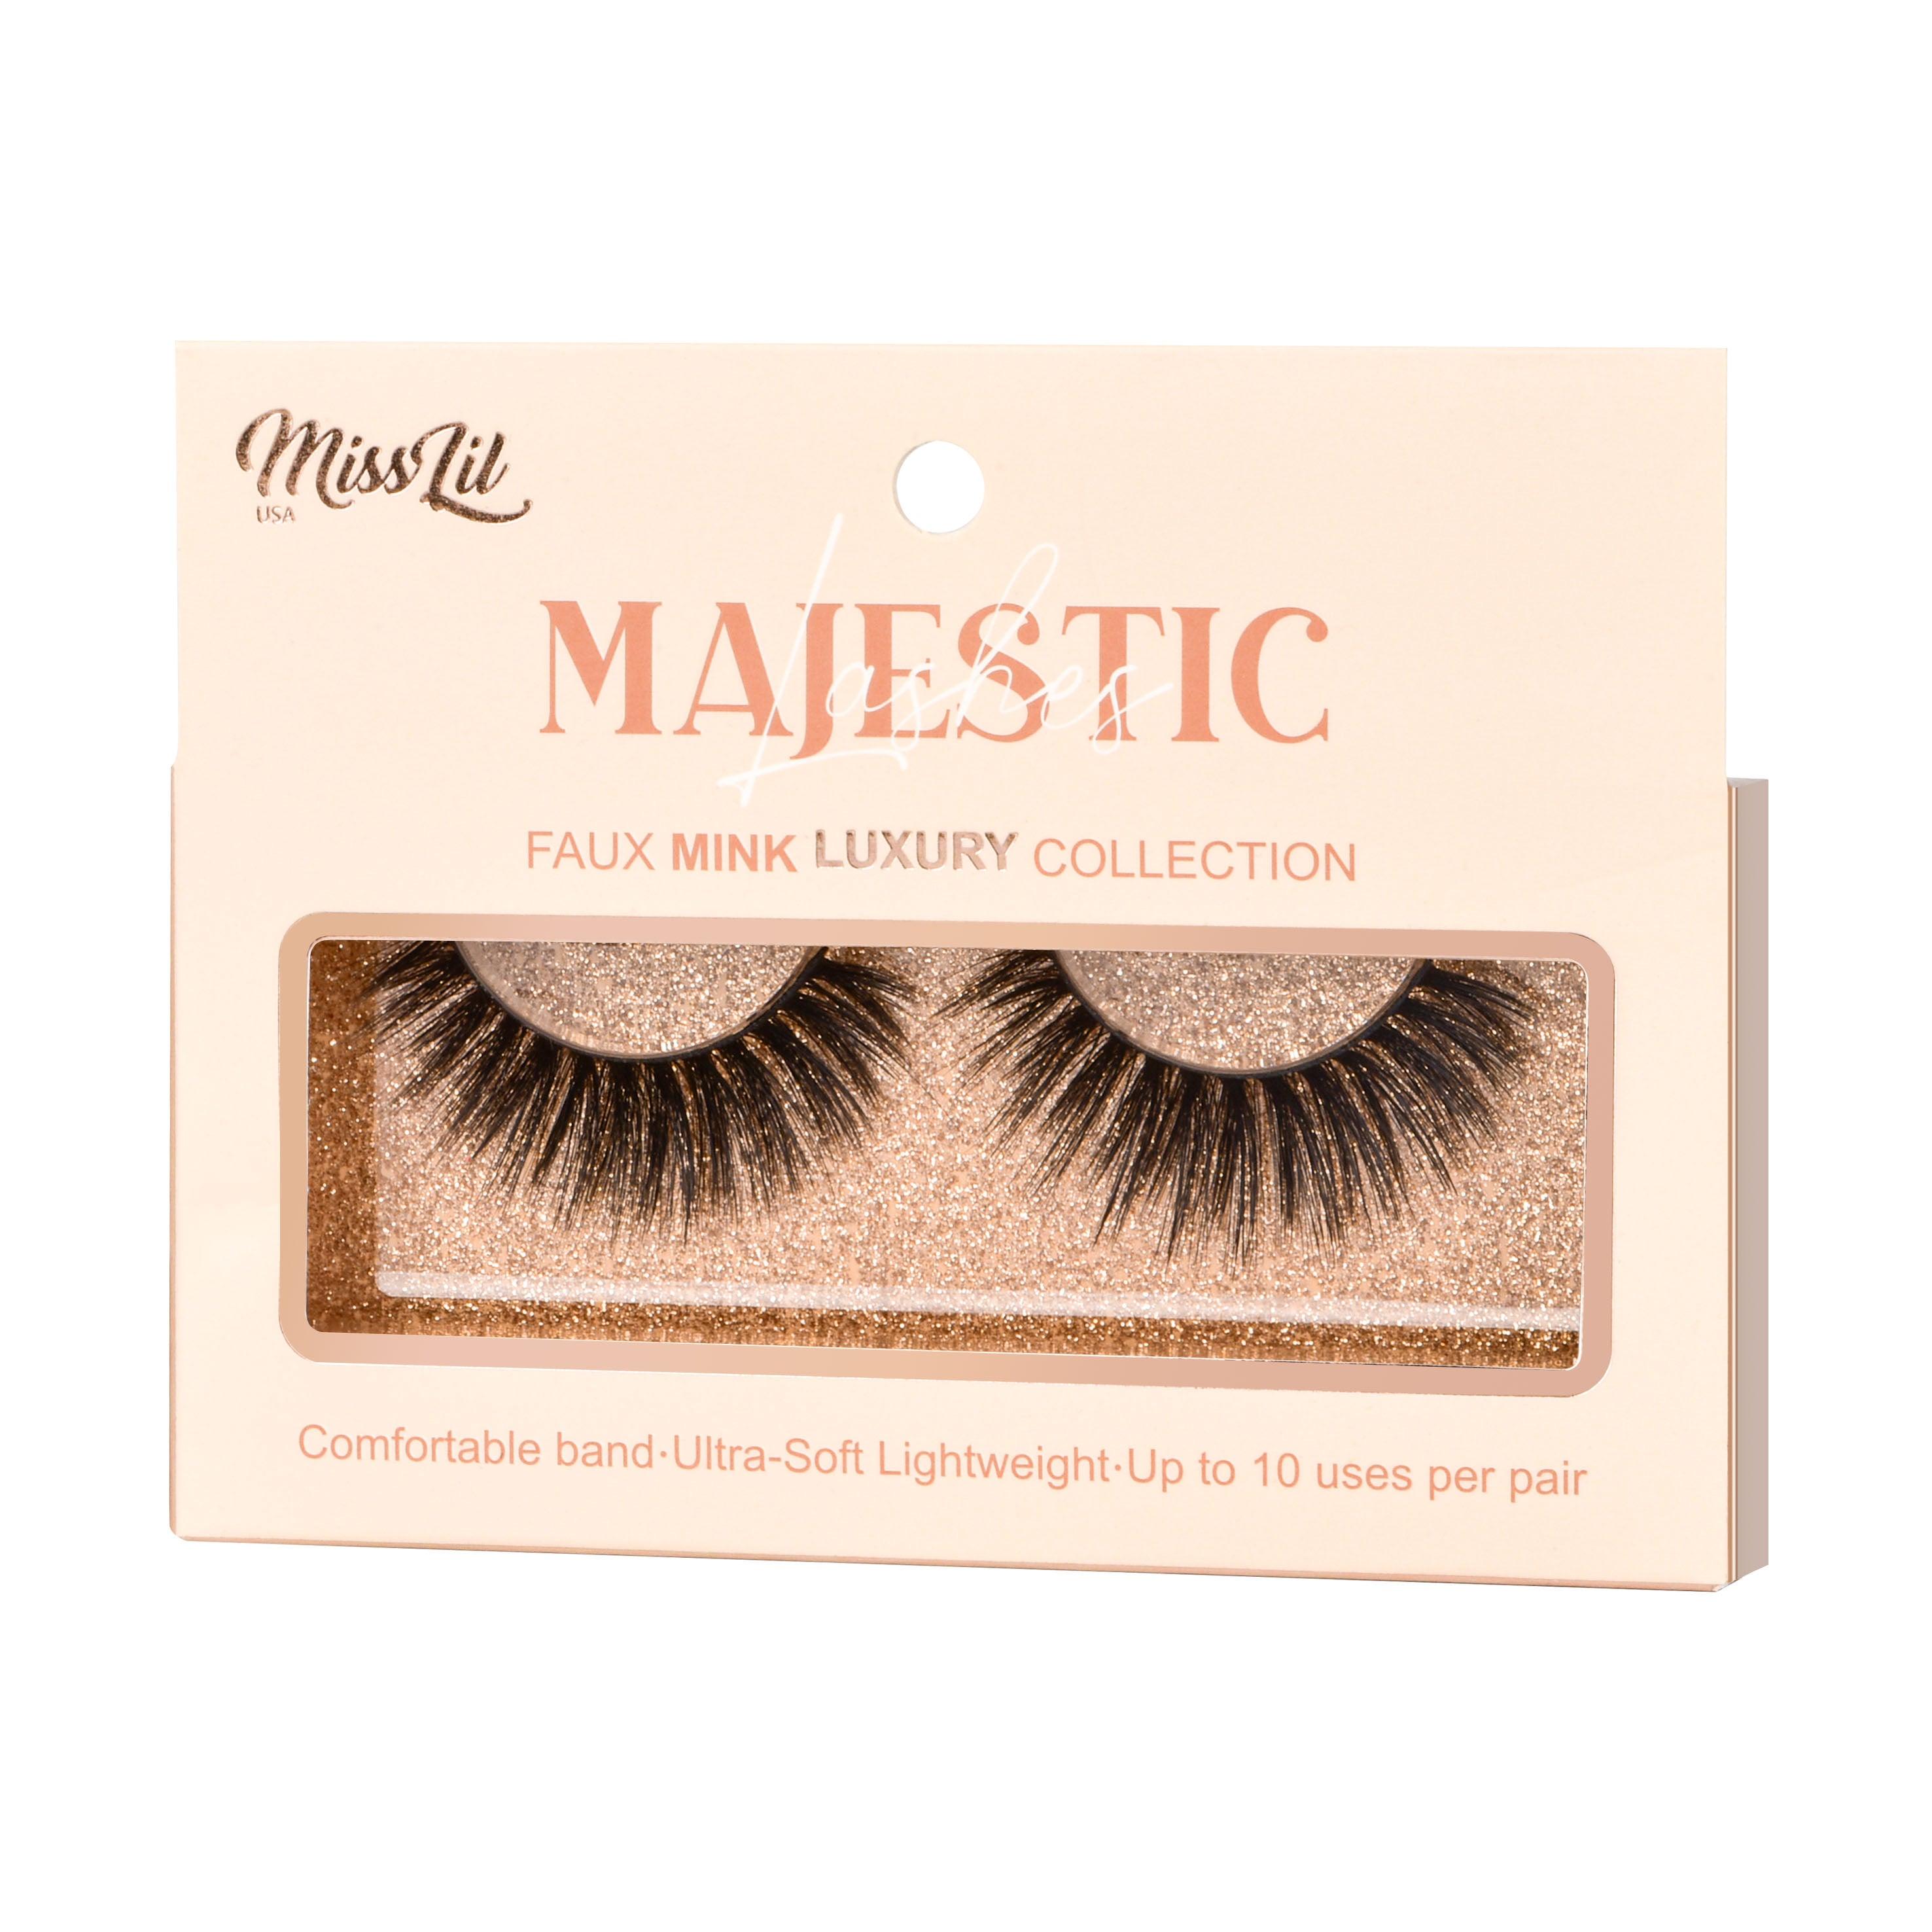 1-PAIR LASHES-MAJESTIC COLLECTION #6 (PACK OF 3) - Miss Lil USA